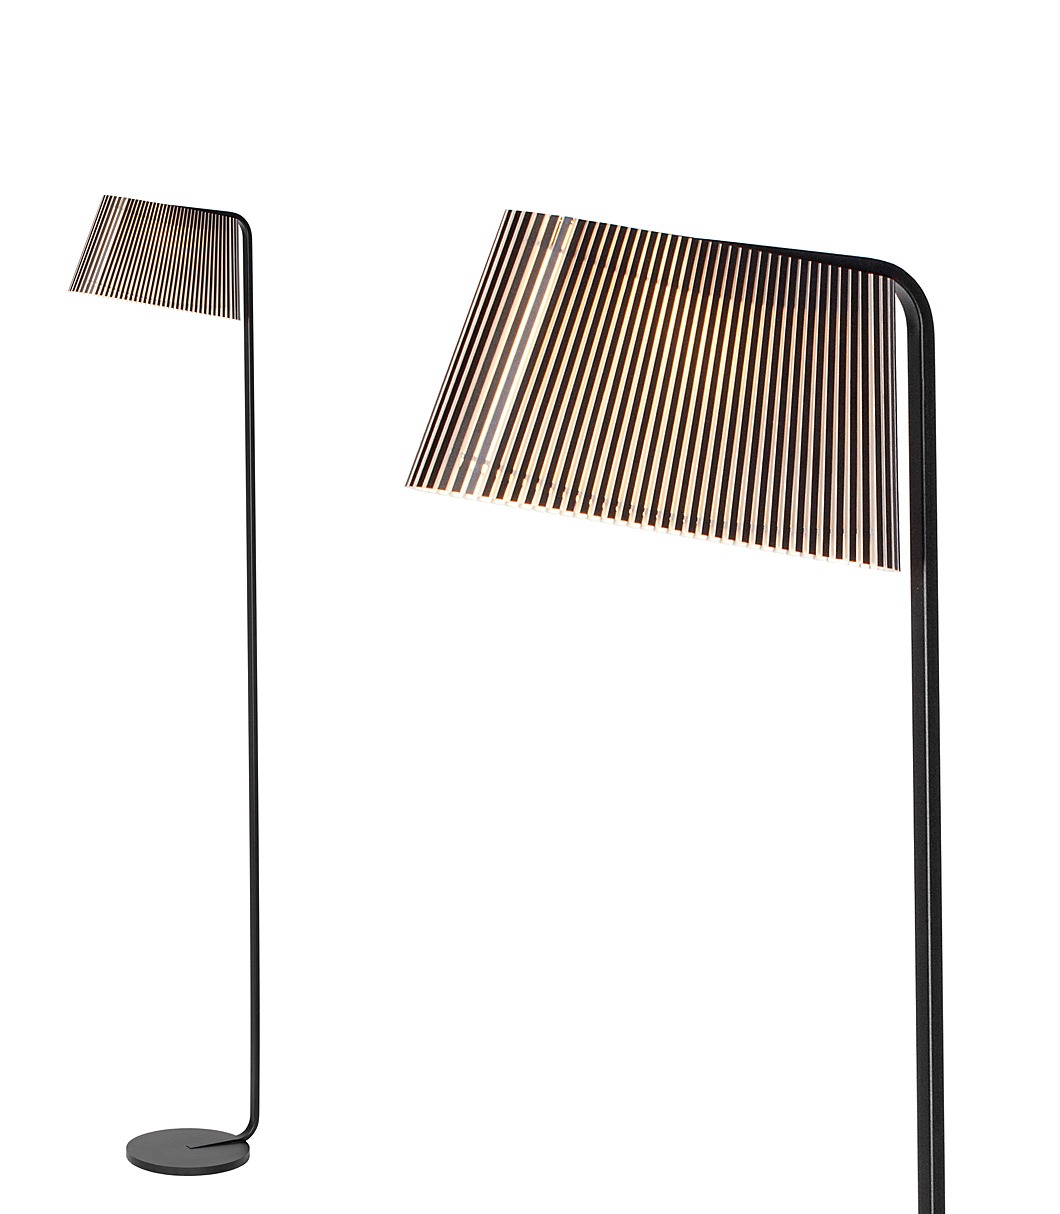 Owalo 7010 floor lamp is available in black laminated